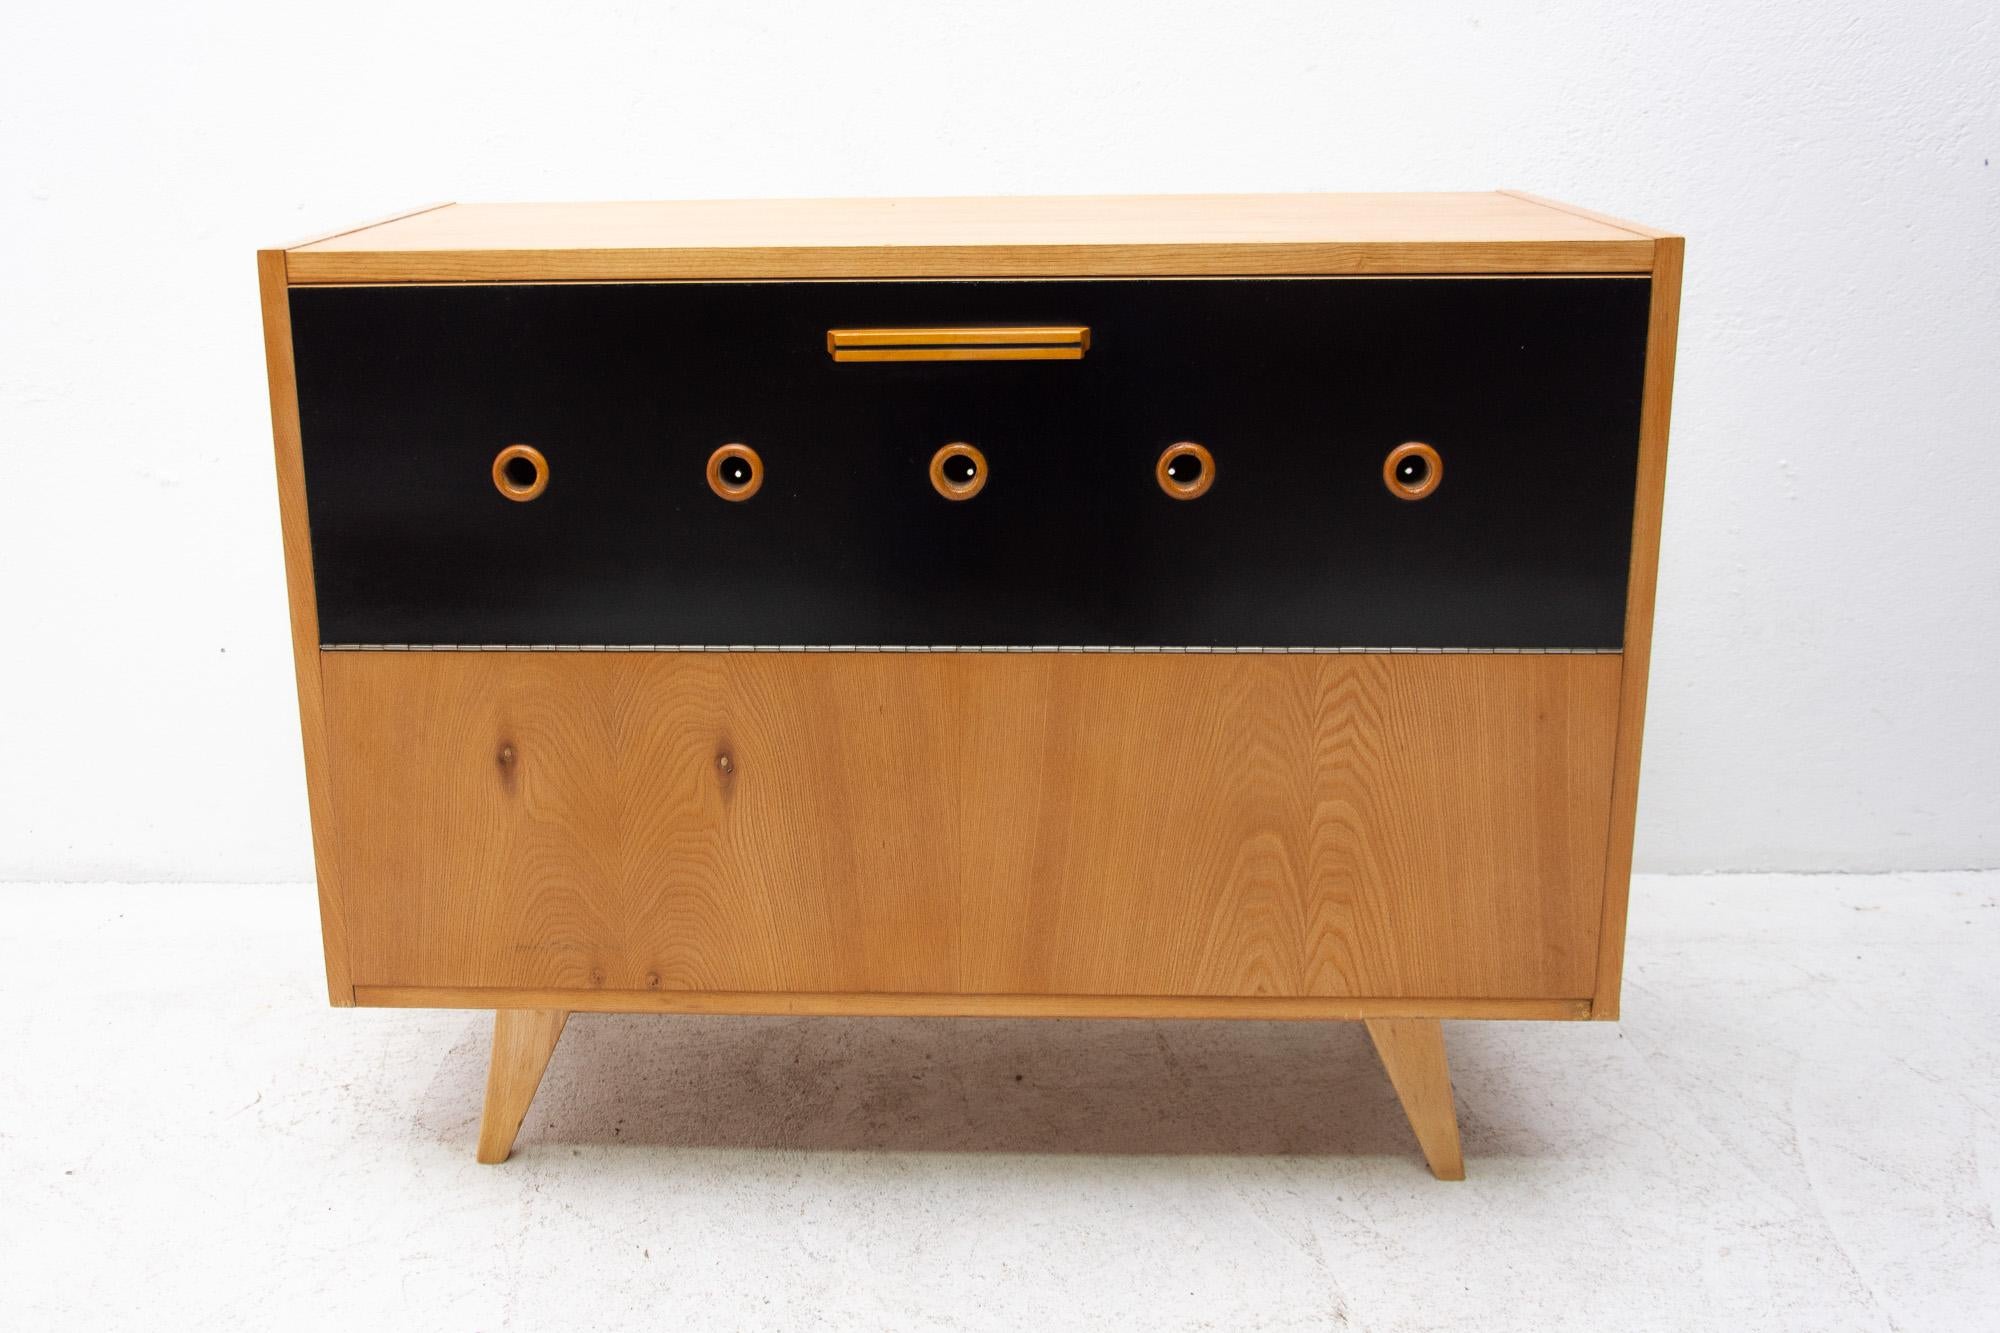 Mid-Century Modern dresser by Frantisek Jirak for Tatra nabytok. Made in the former Czechoslovakia during the 1960s. The dresser is a part of living set. The furniture is primarily intended as a dresser for bedding, but it can also be used as a TV